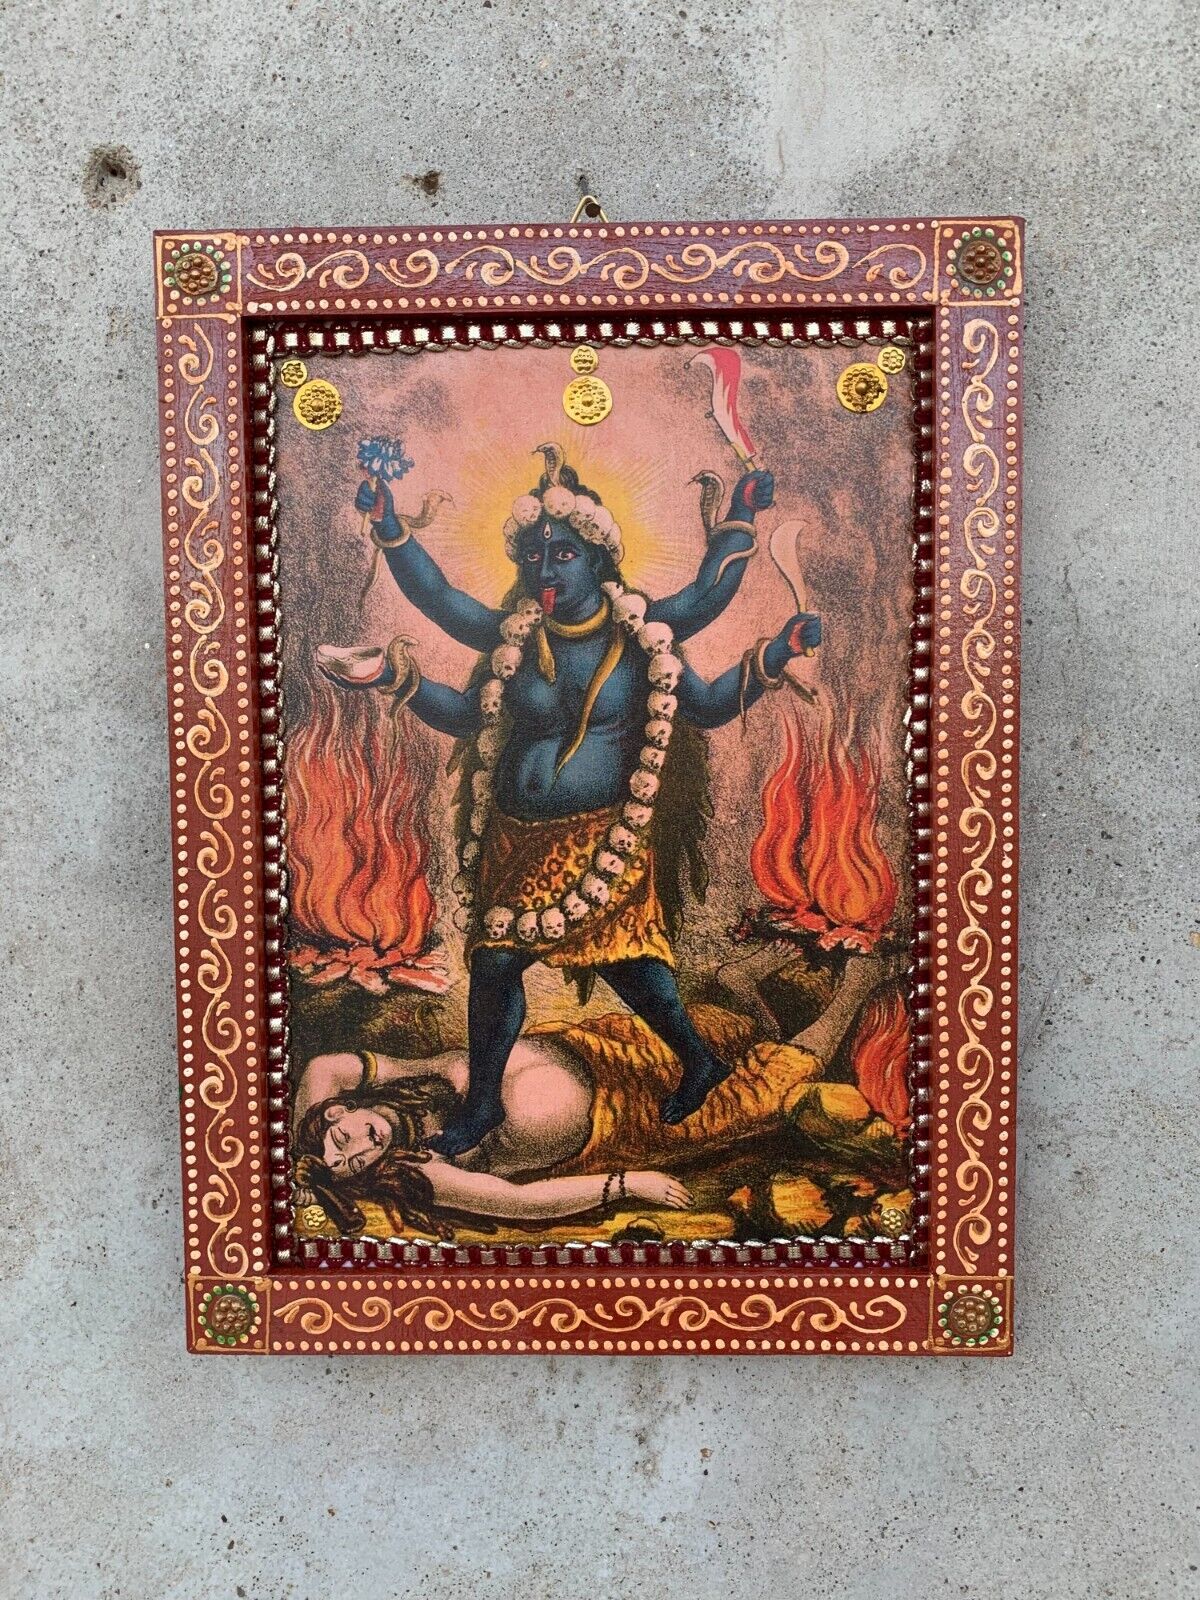 Old Kali Mata Photo,Maha Kali with Shiva Picture,Wooden Painted frame- 8.5x11.5\